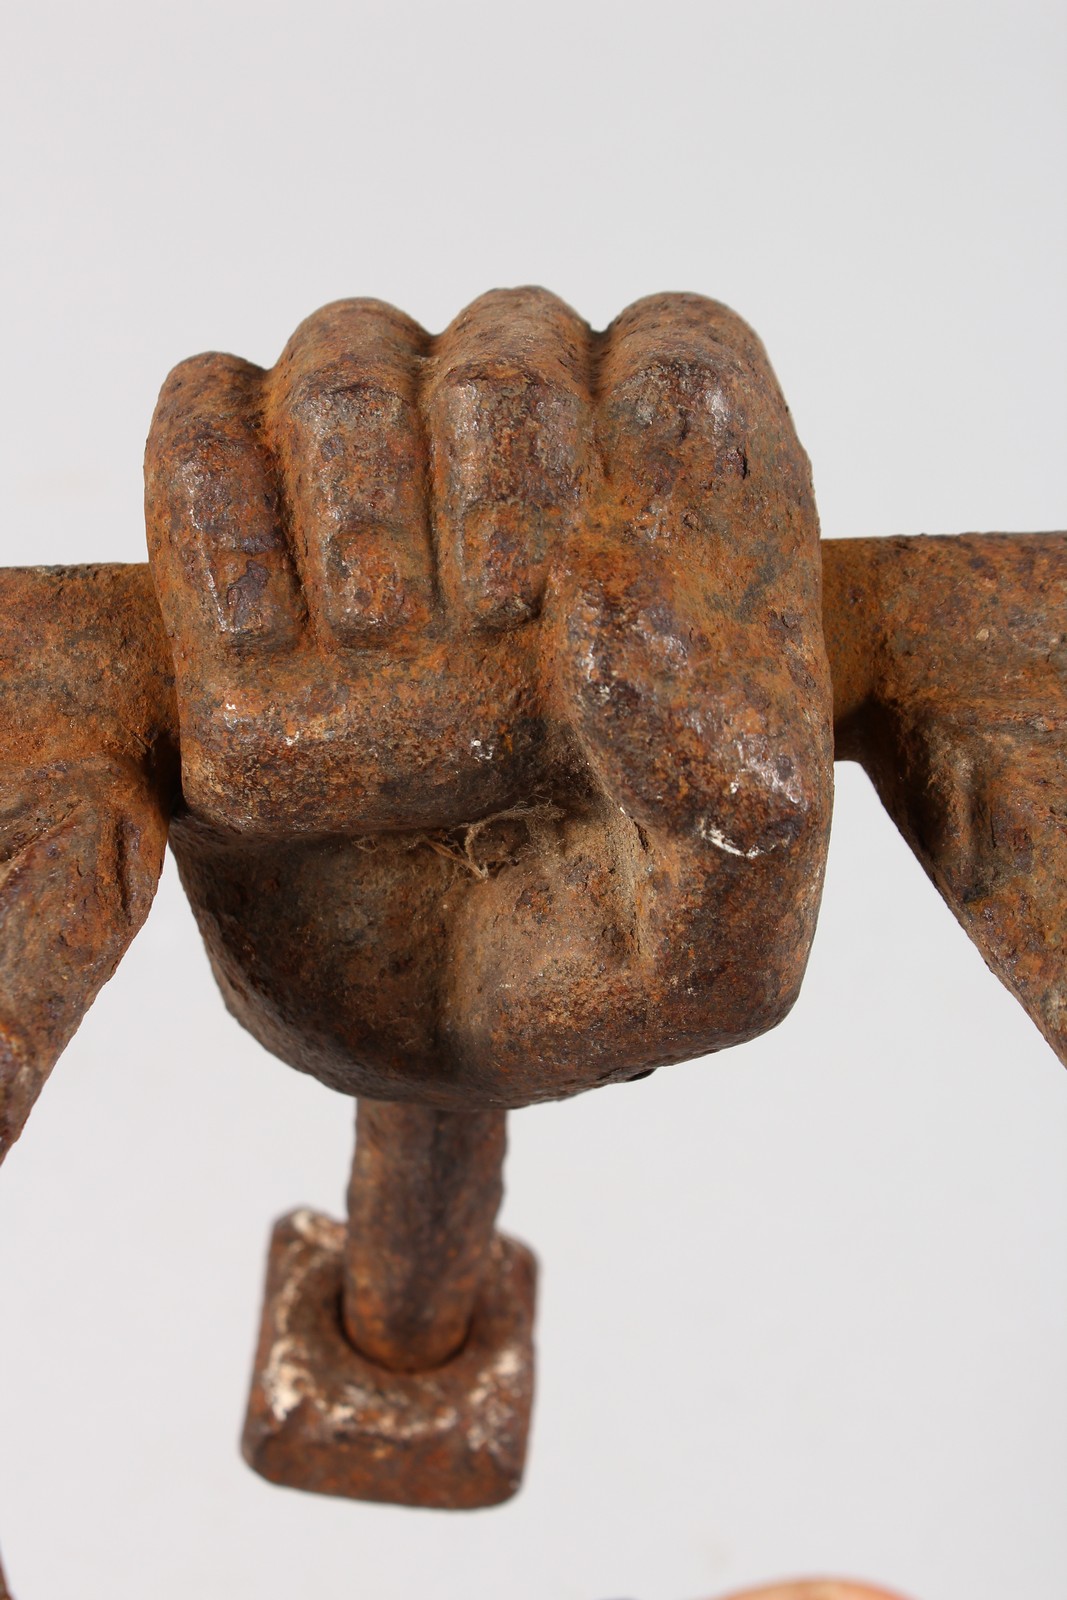 A CAST IRON CLENCHED FIST DOOR KNOCKER. - Image 3 of 3